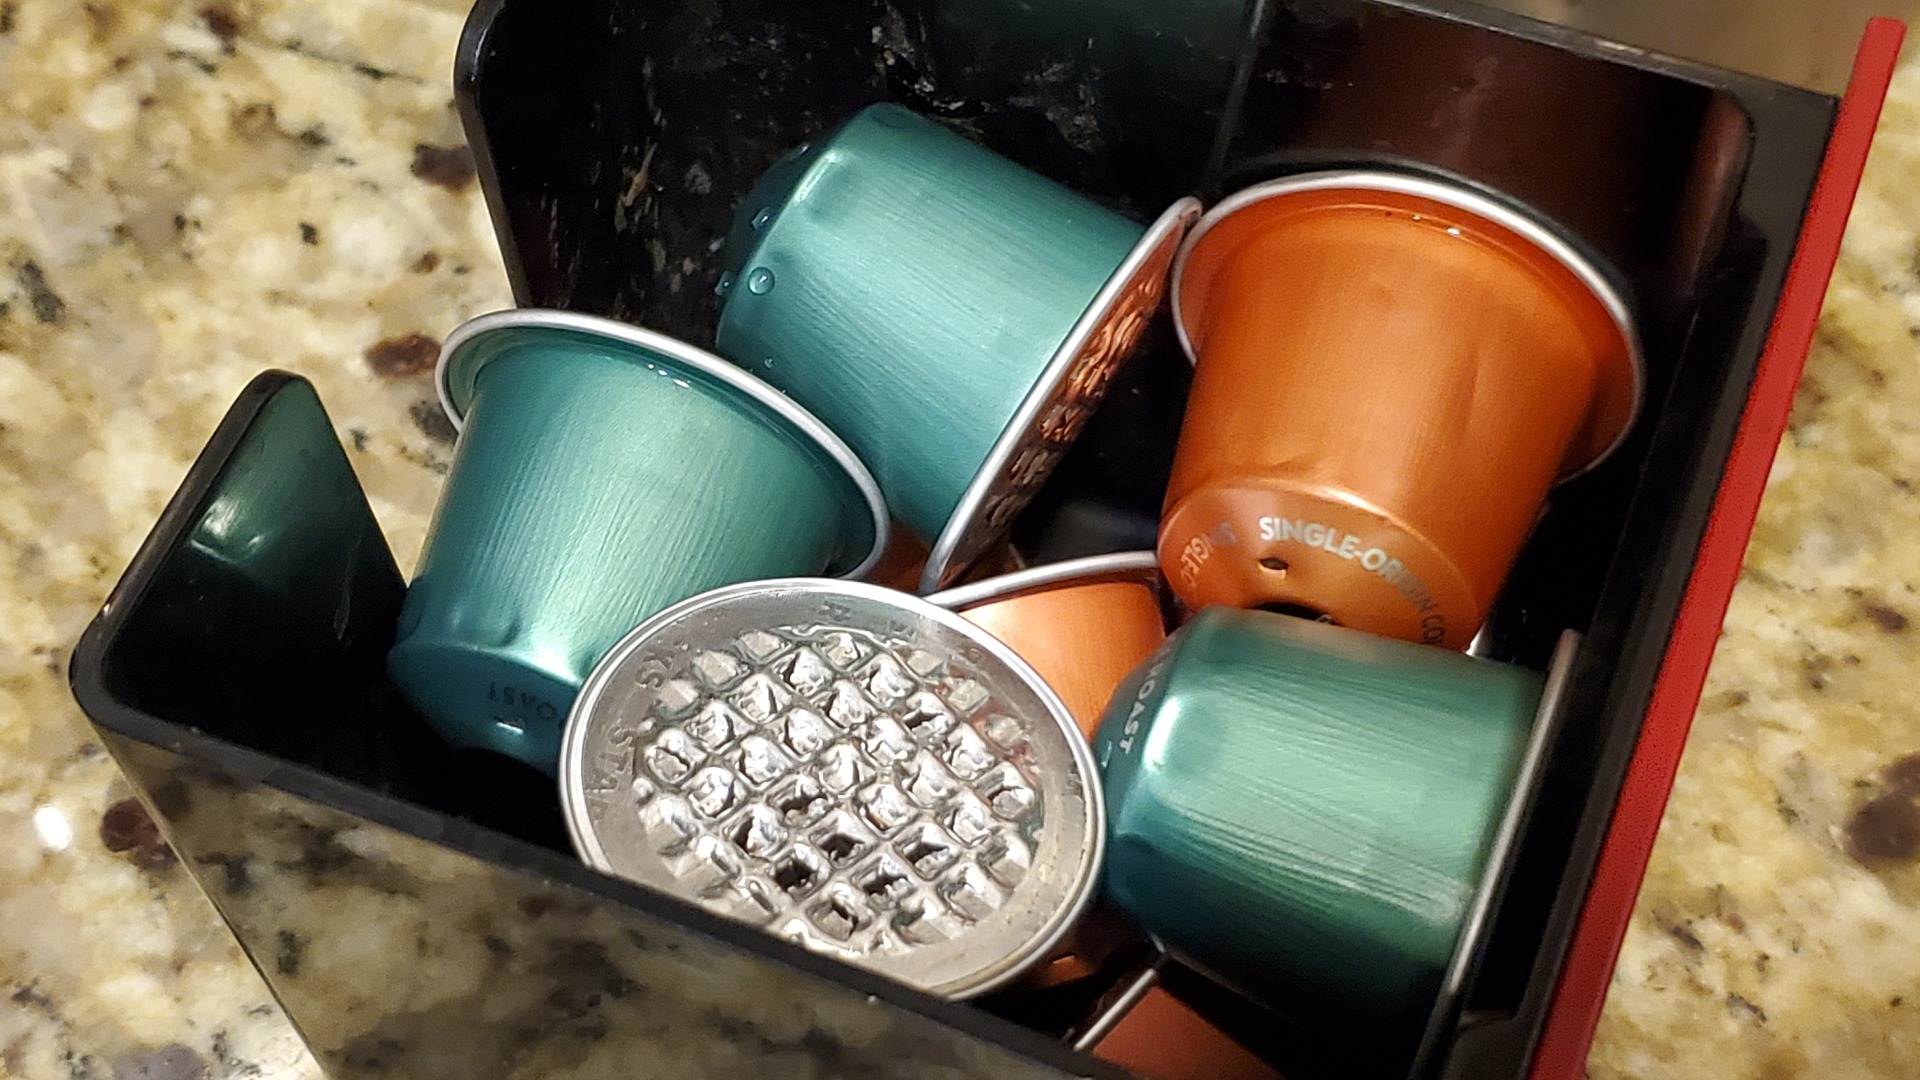 Nespresso is rolling out a completely new kind of coffee pod: ‘A game-changer’